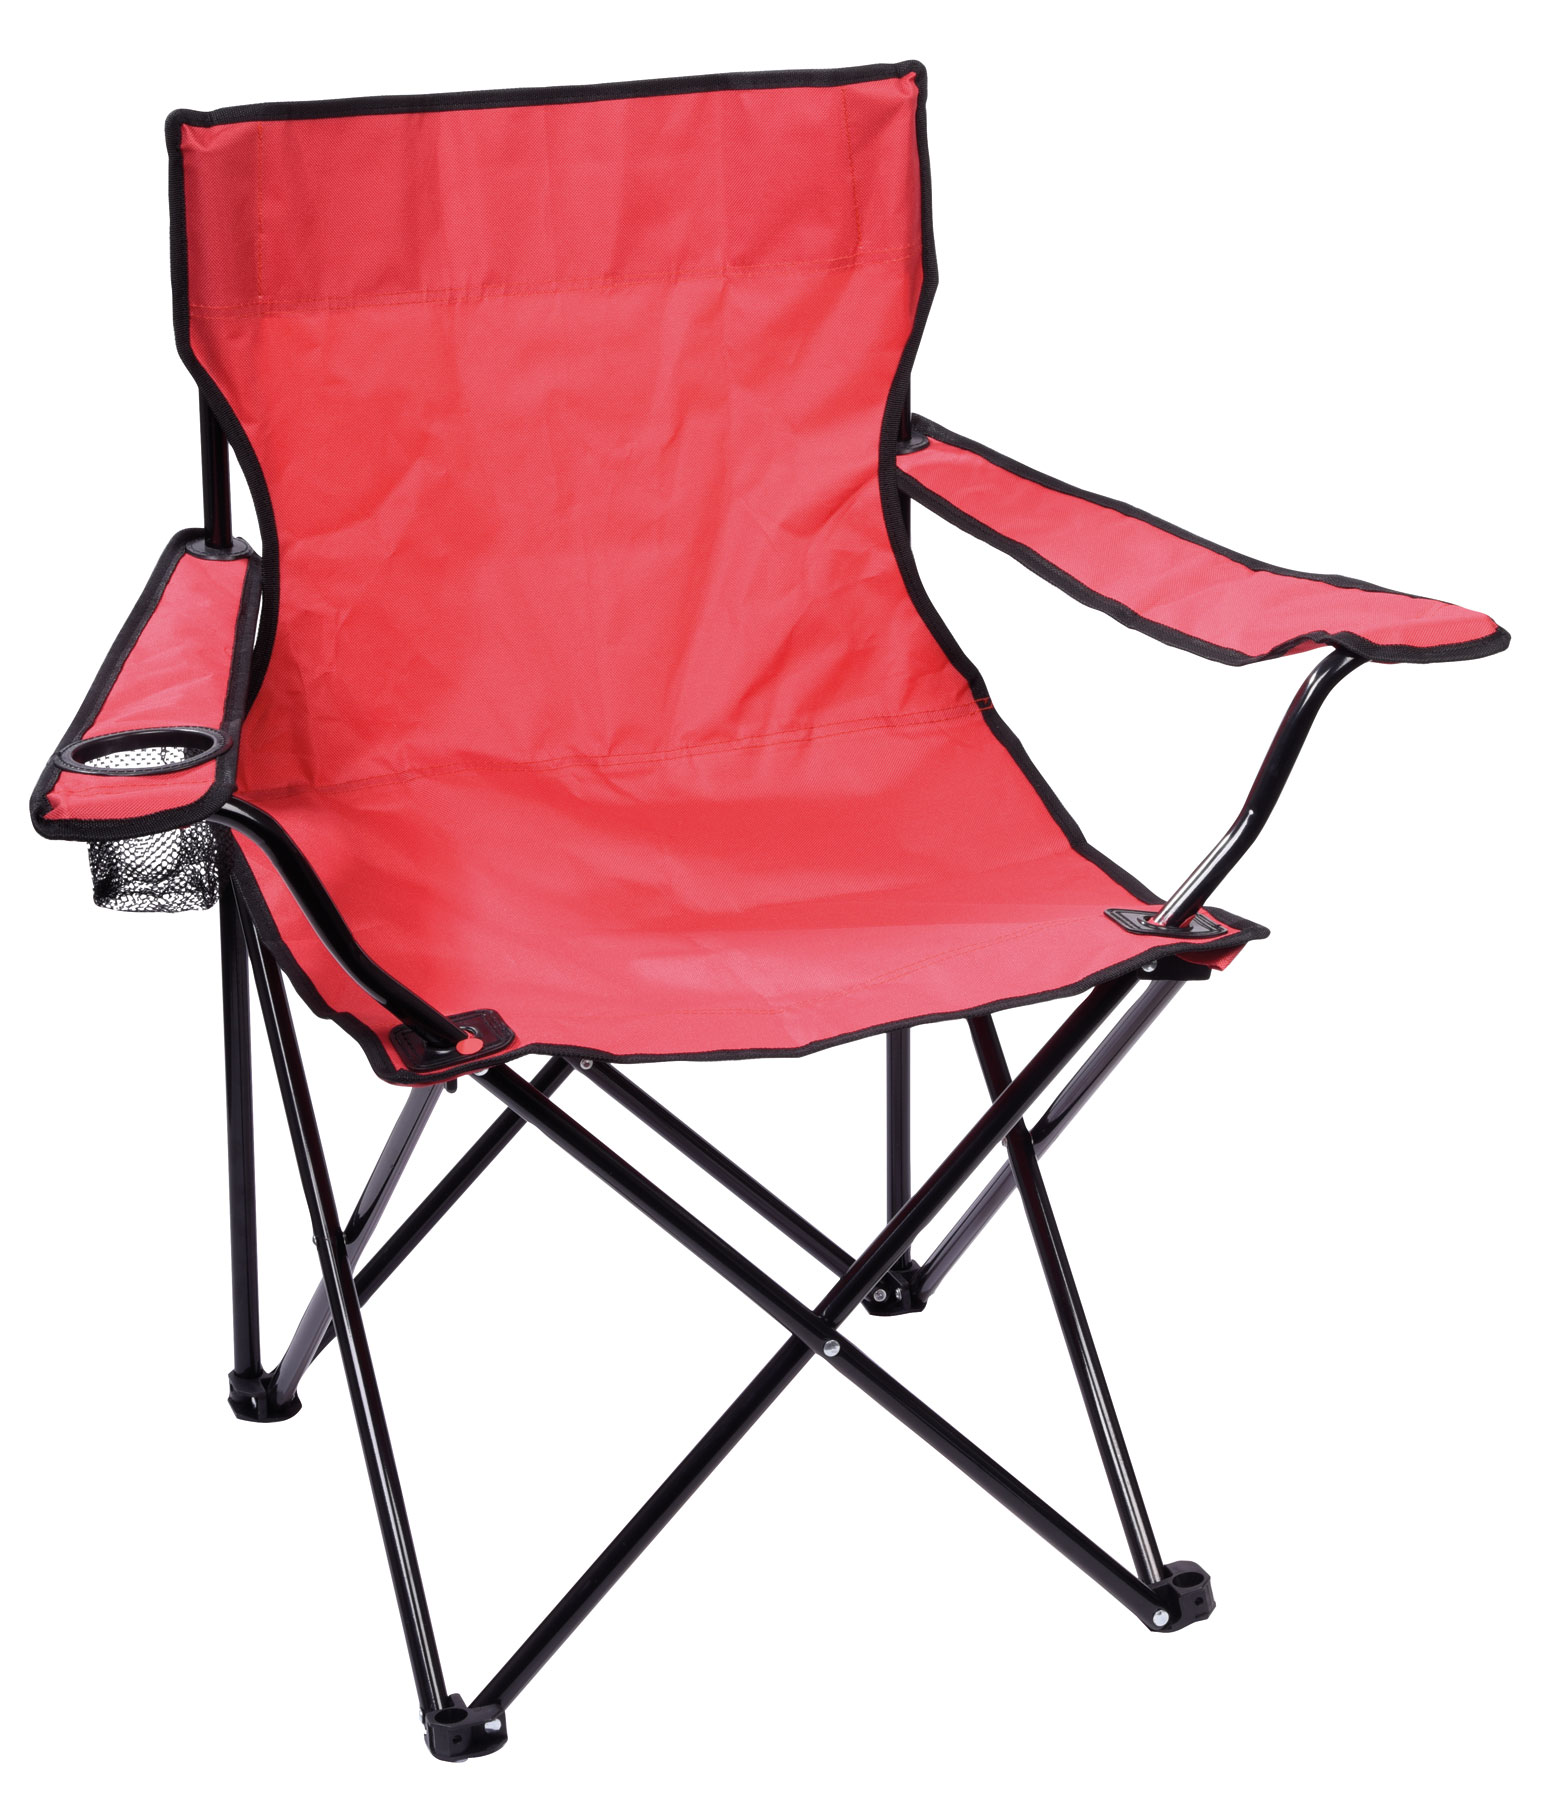 Beach and camping chair SUNNY DAY - red